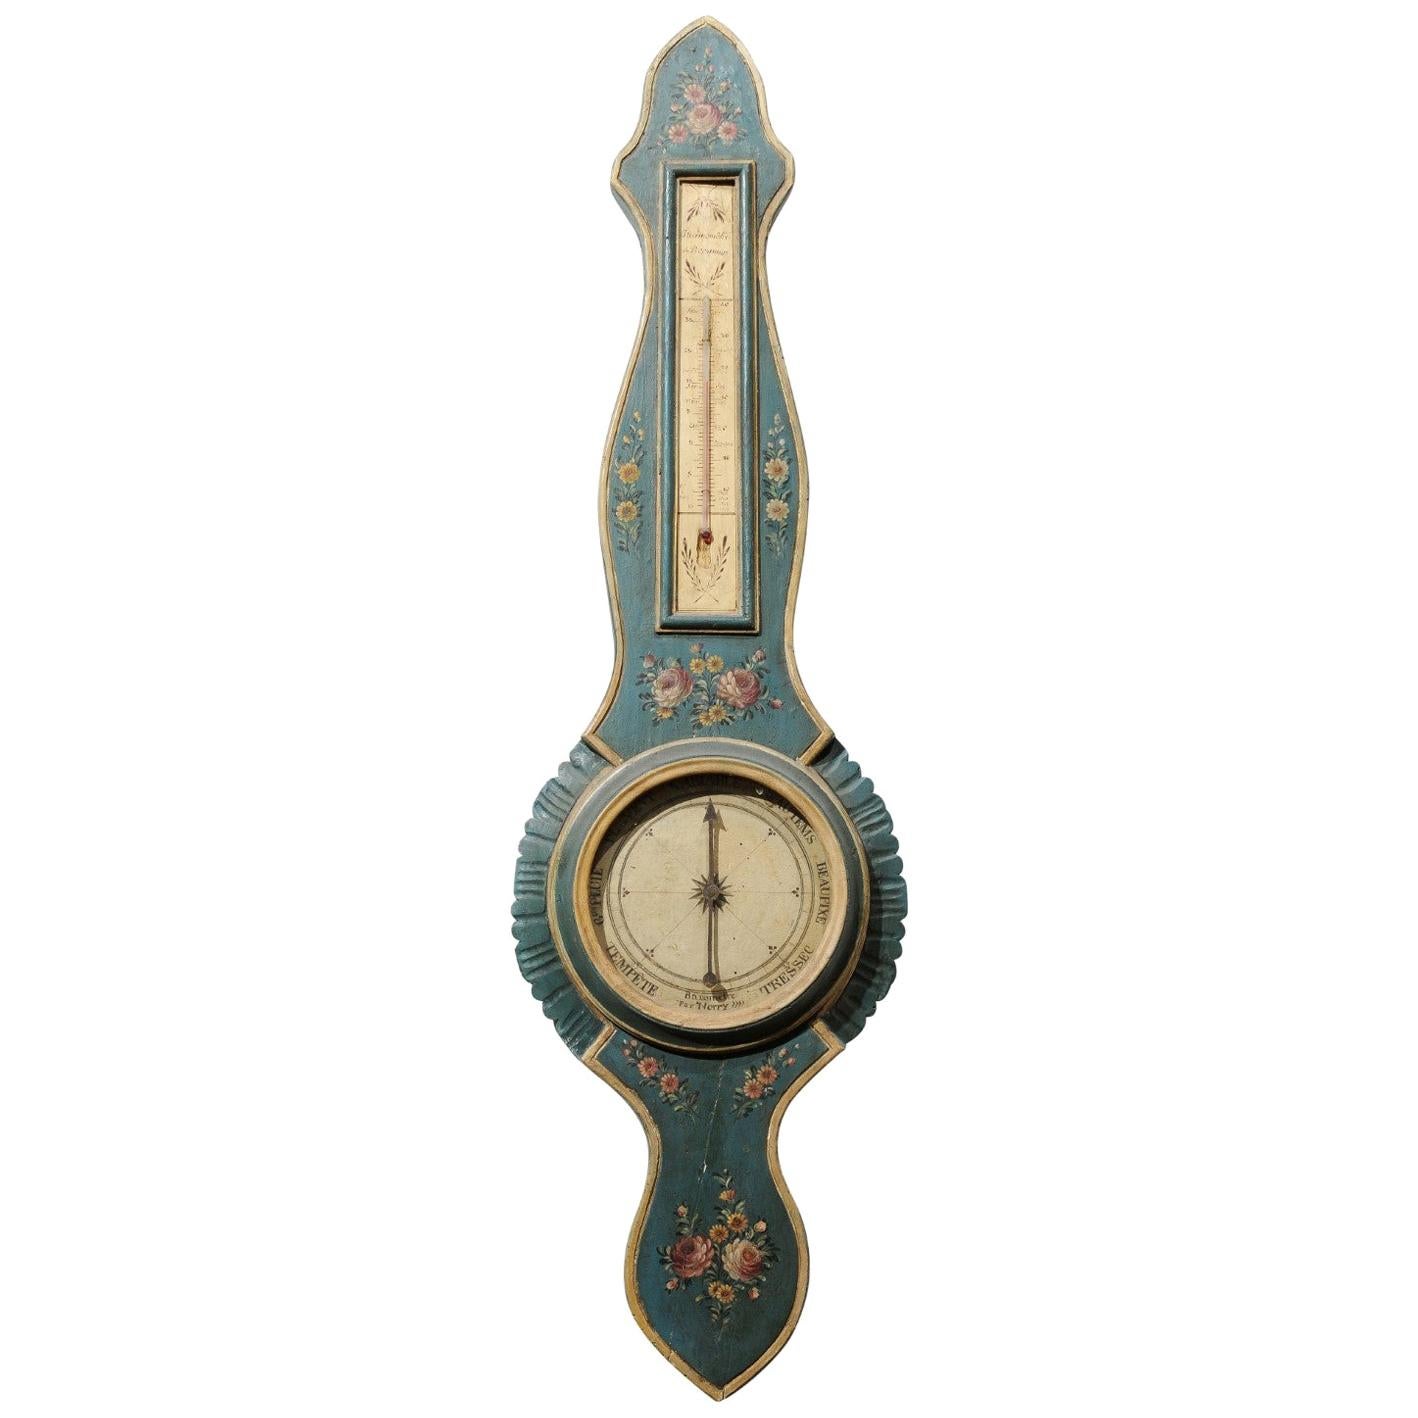 French Tall Provençal Barometer with Hand Painted Floral Decor, circa 1780